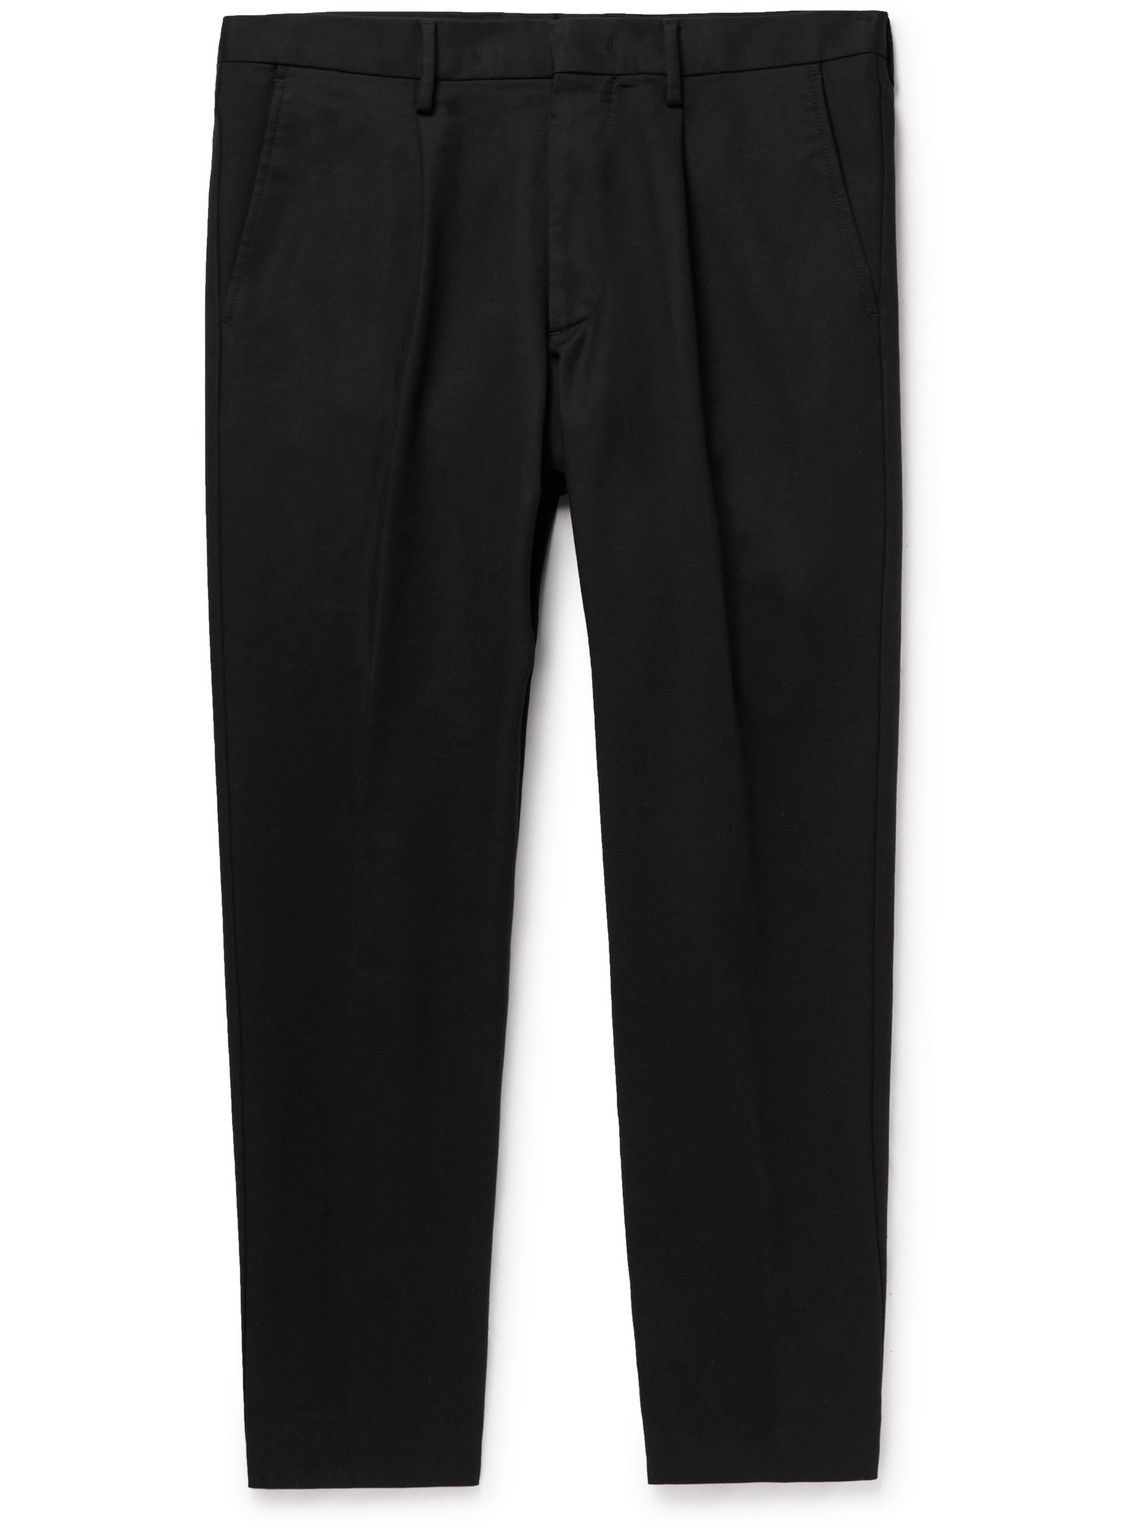 NN07 - Bill Tapered Cropped Pleated Stretch-Cotton Trousers - Black NN07